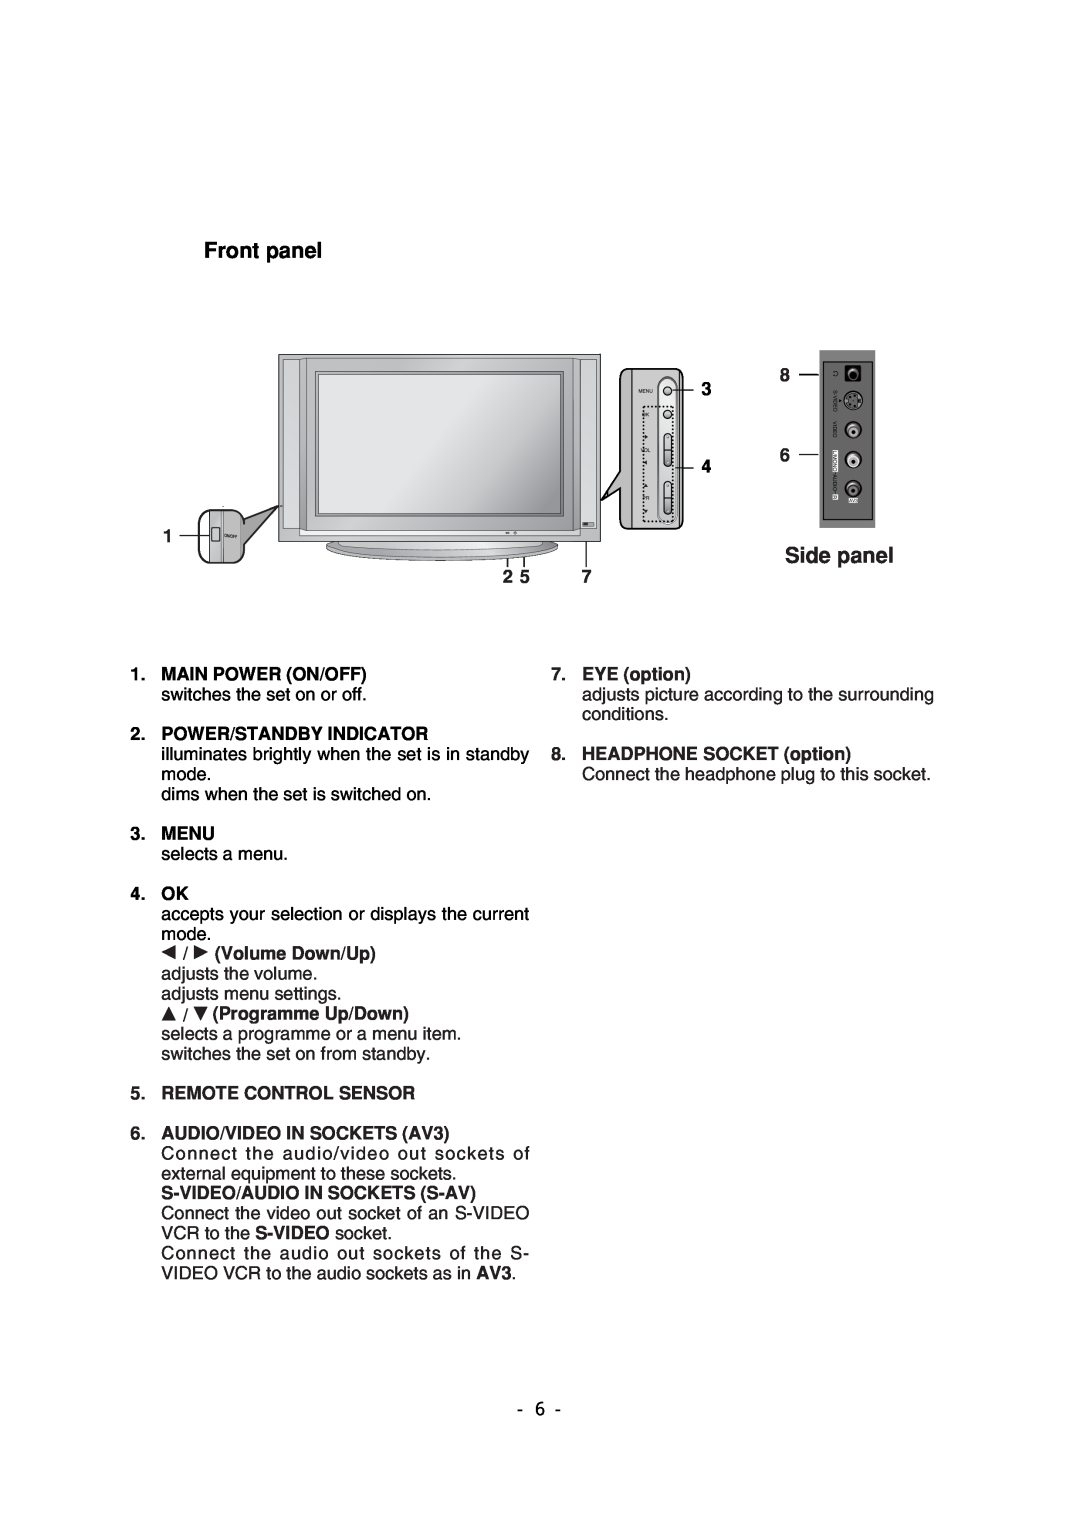 LG Electronics 29FS2AMB/ANX-ZE Front panel, MAIN POWER ON/OFF switches the set on or off, Power/Standby Indicator, Menu 